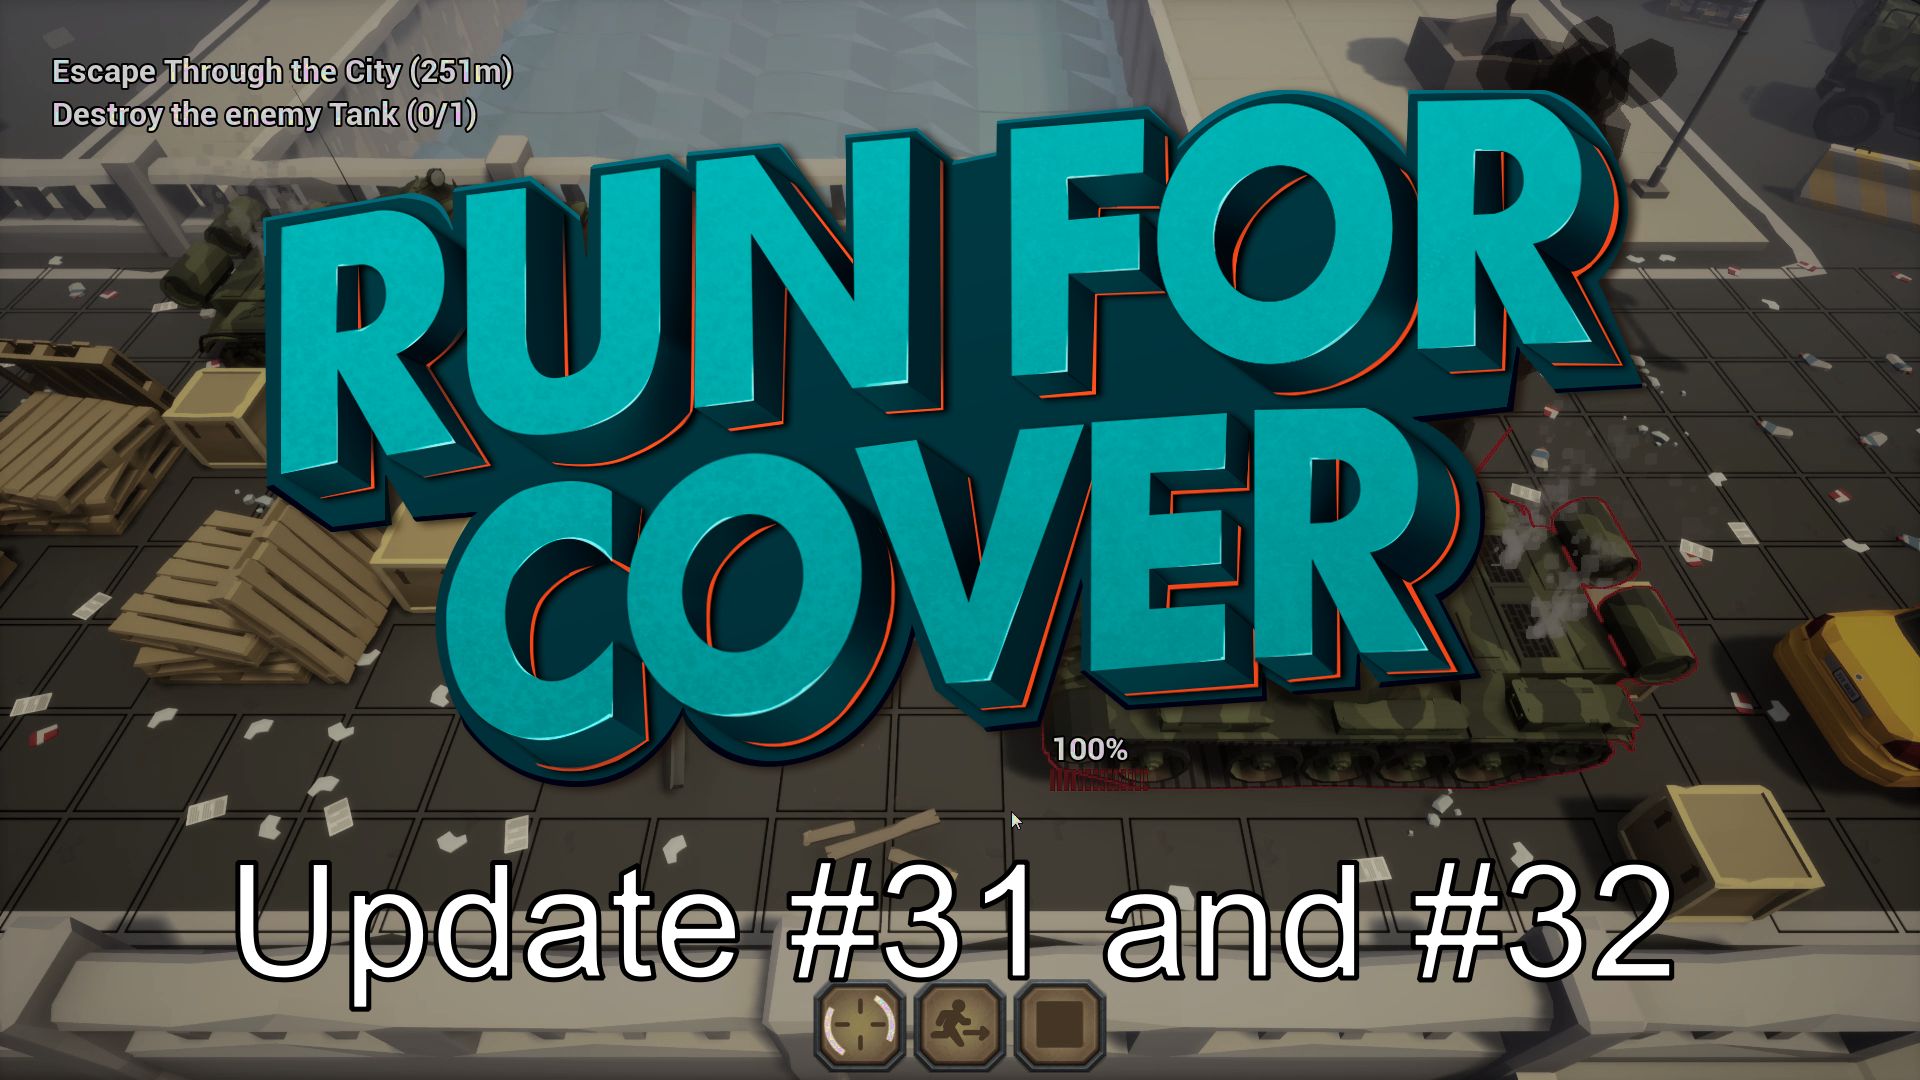 Run for Cover. Running for cover